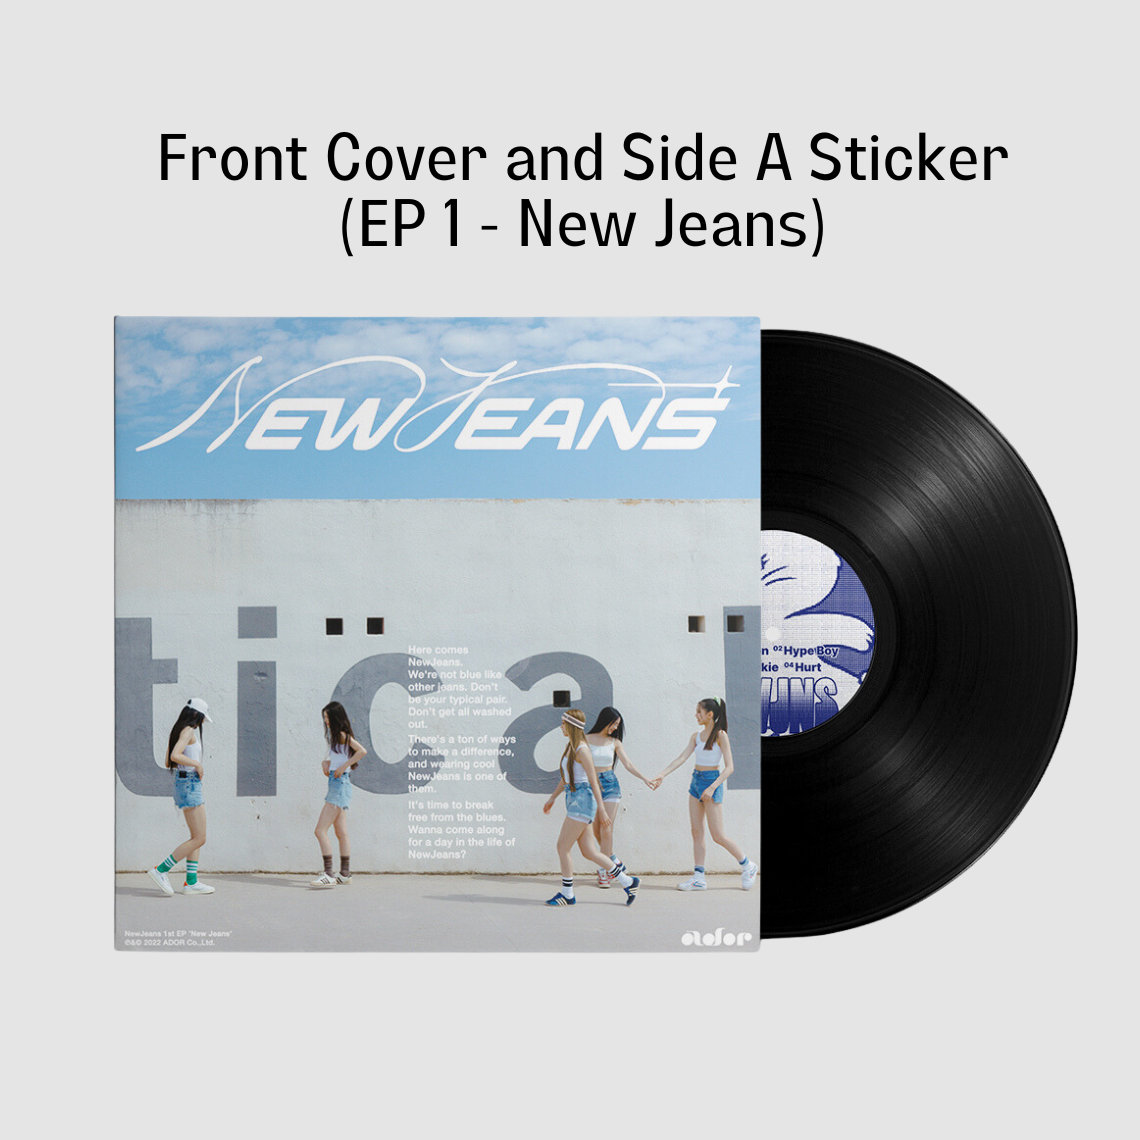 Newjeans 1st Ep new Jeans on Side A and 2nd Ep get Up on Side B 12-inch  Vinyl Record Free and Fast Shipping Worldwide 